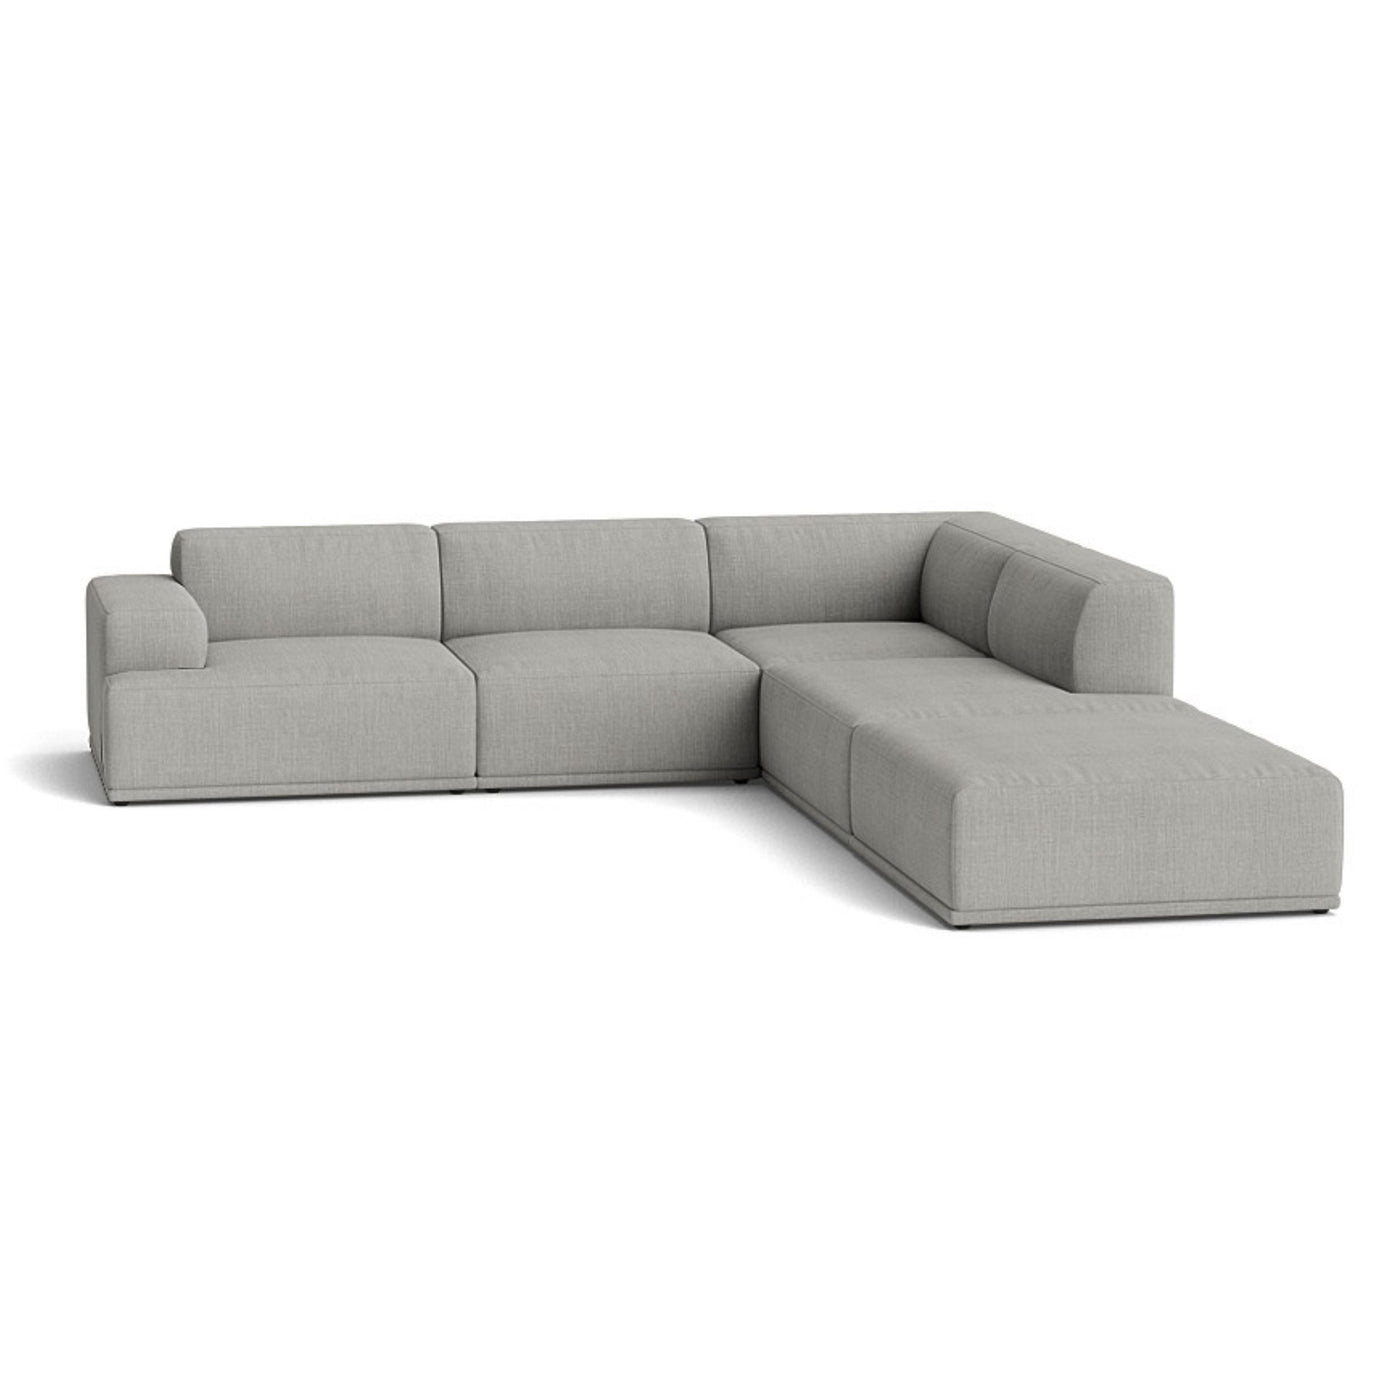 Muuto Connect Soft Modular Corner Sofa, configuration 2. Made-to-order from someday designs. #colour_remix-133